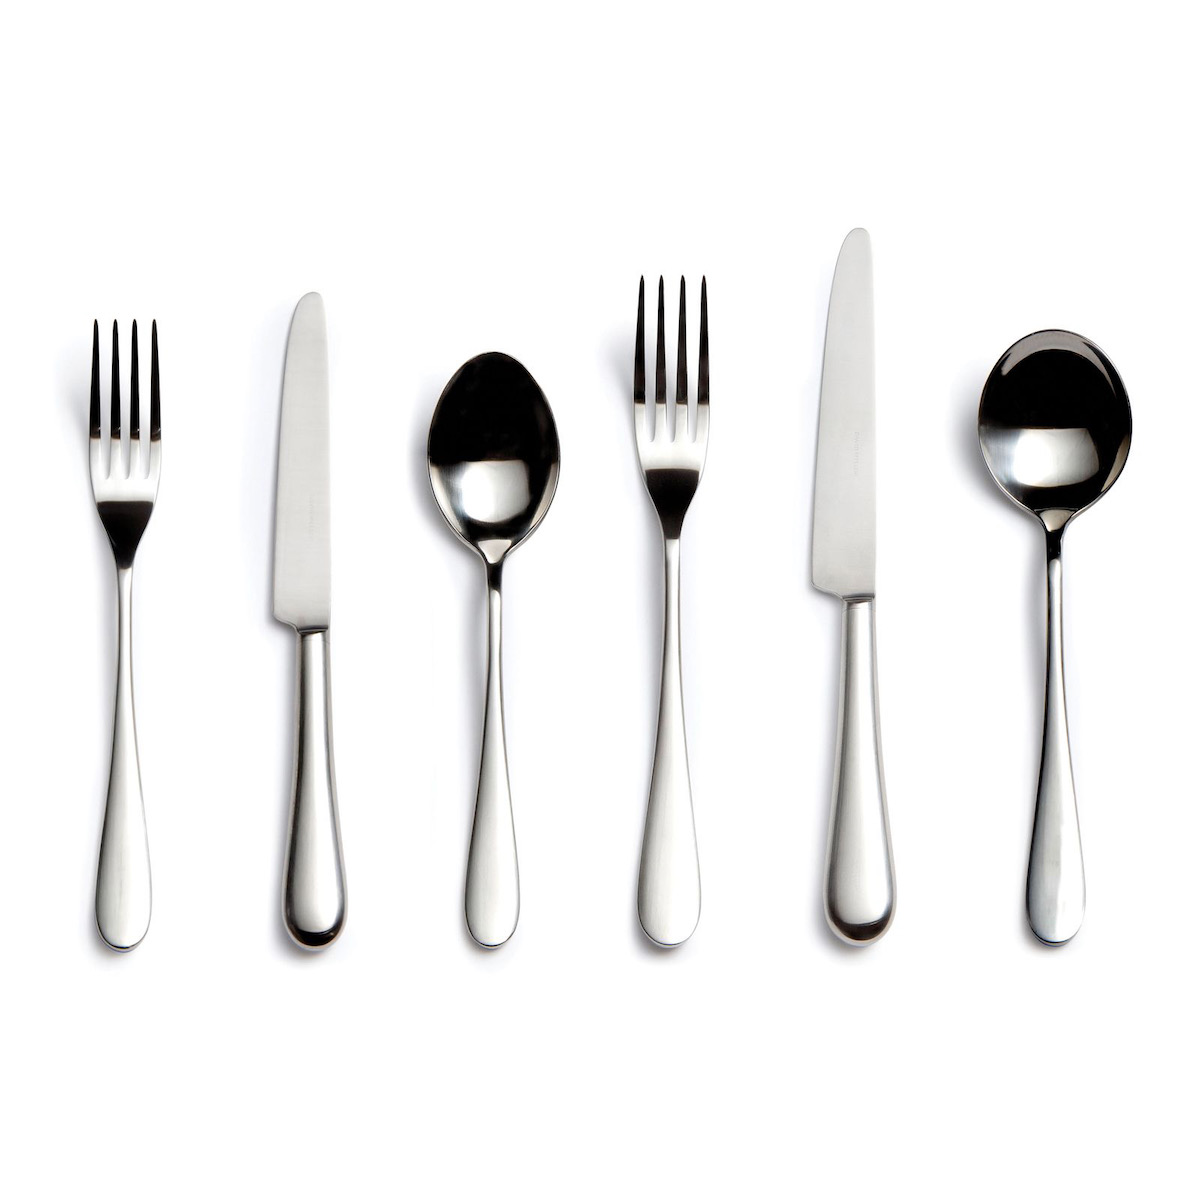 Cutlery arranged alternating fork, knife, spoon, fork, knife, spoon, on a white background 